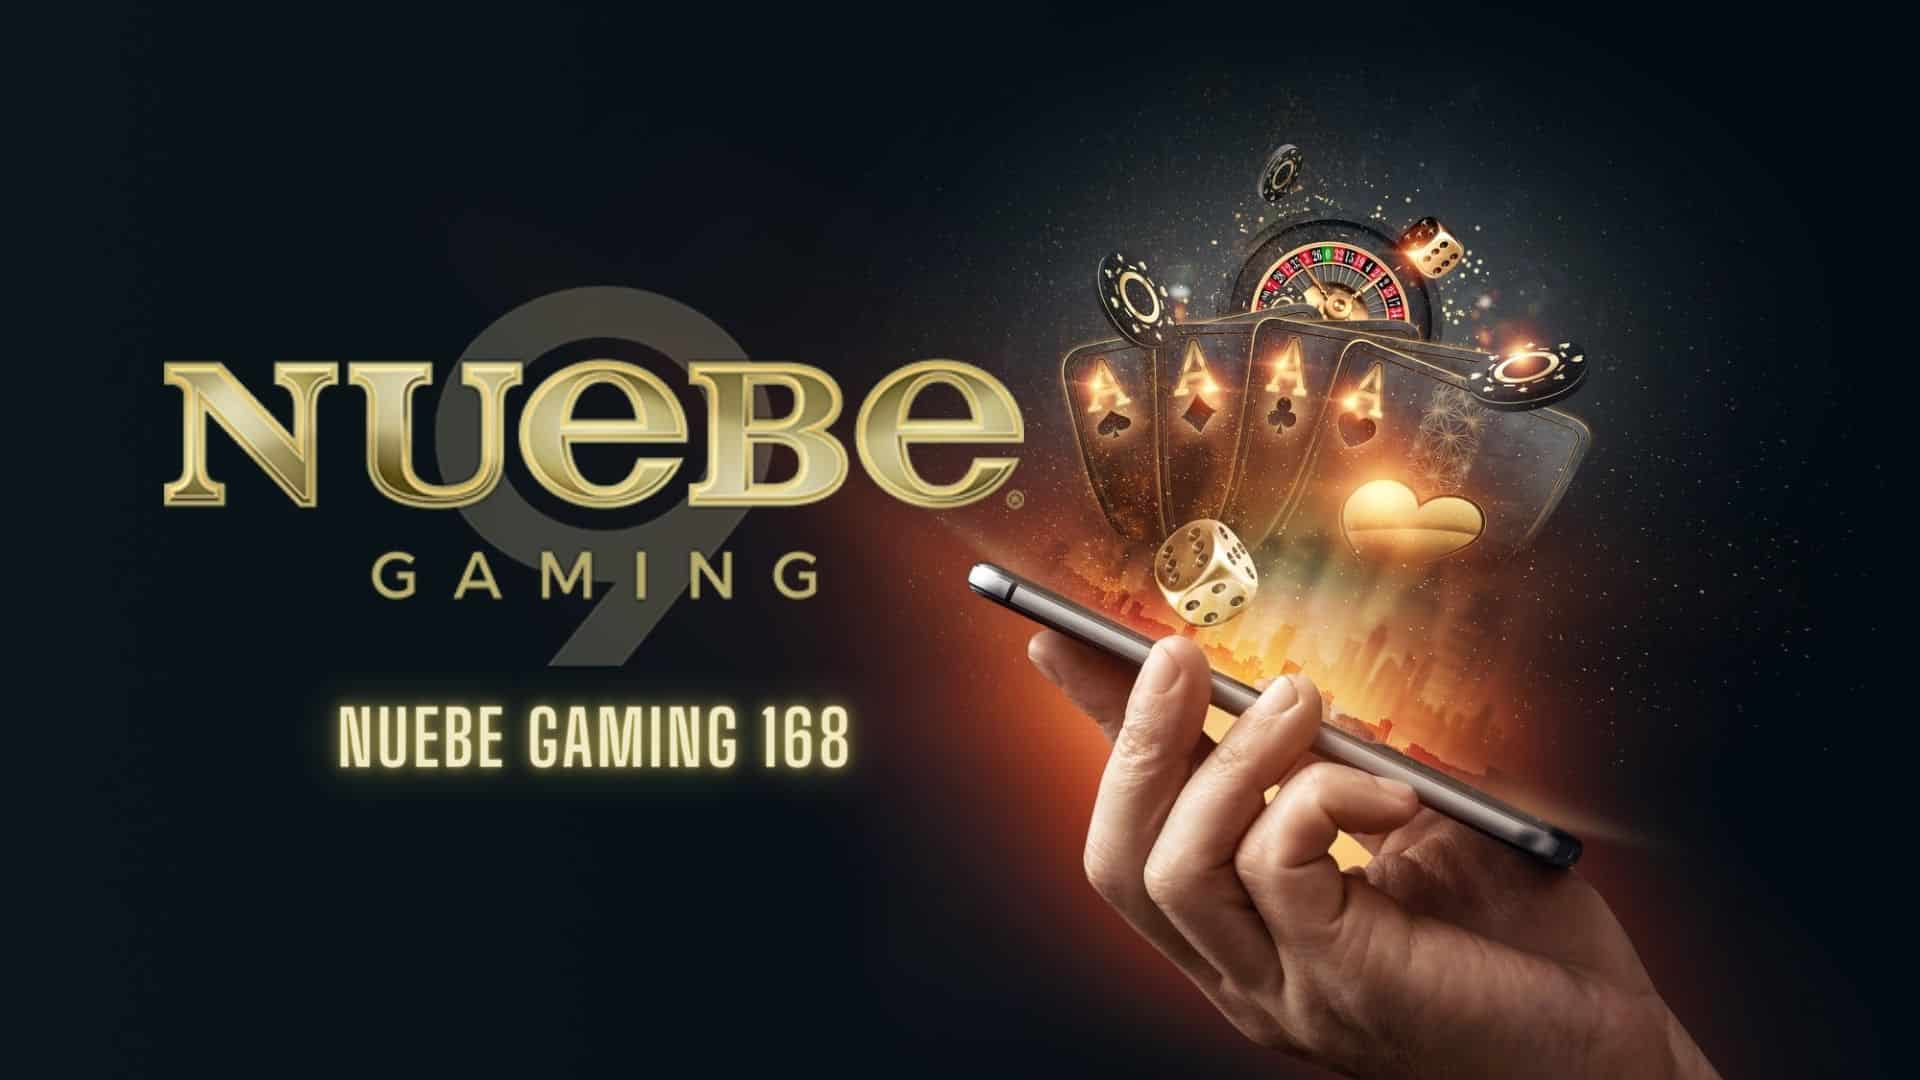 Nuebe Gaming Blog is a leading player in the mobile gaming industry, known for its commitment to creating innovative and engaging games that capture the imagination of players worldwide.